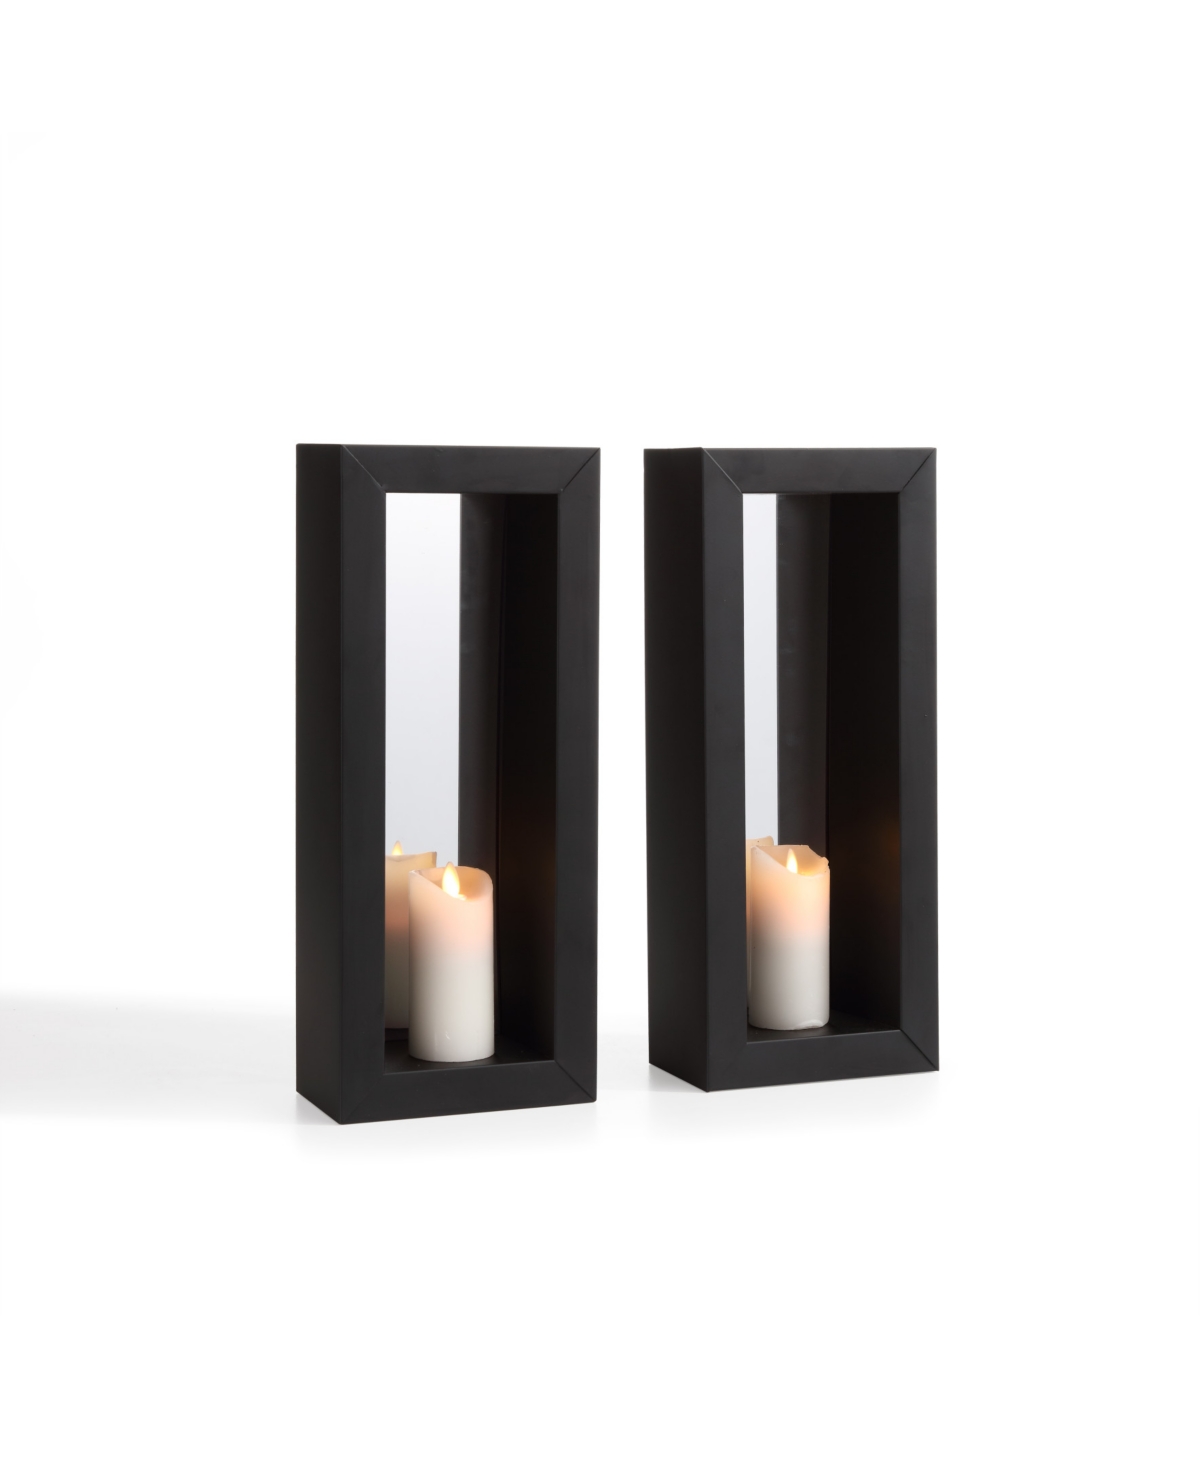 Danya B . Set Of 2 Vertical Mirror Pillar Candle Sconces With Metal Frame In Black